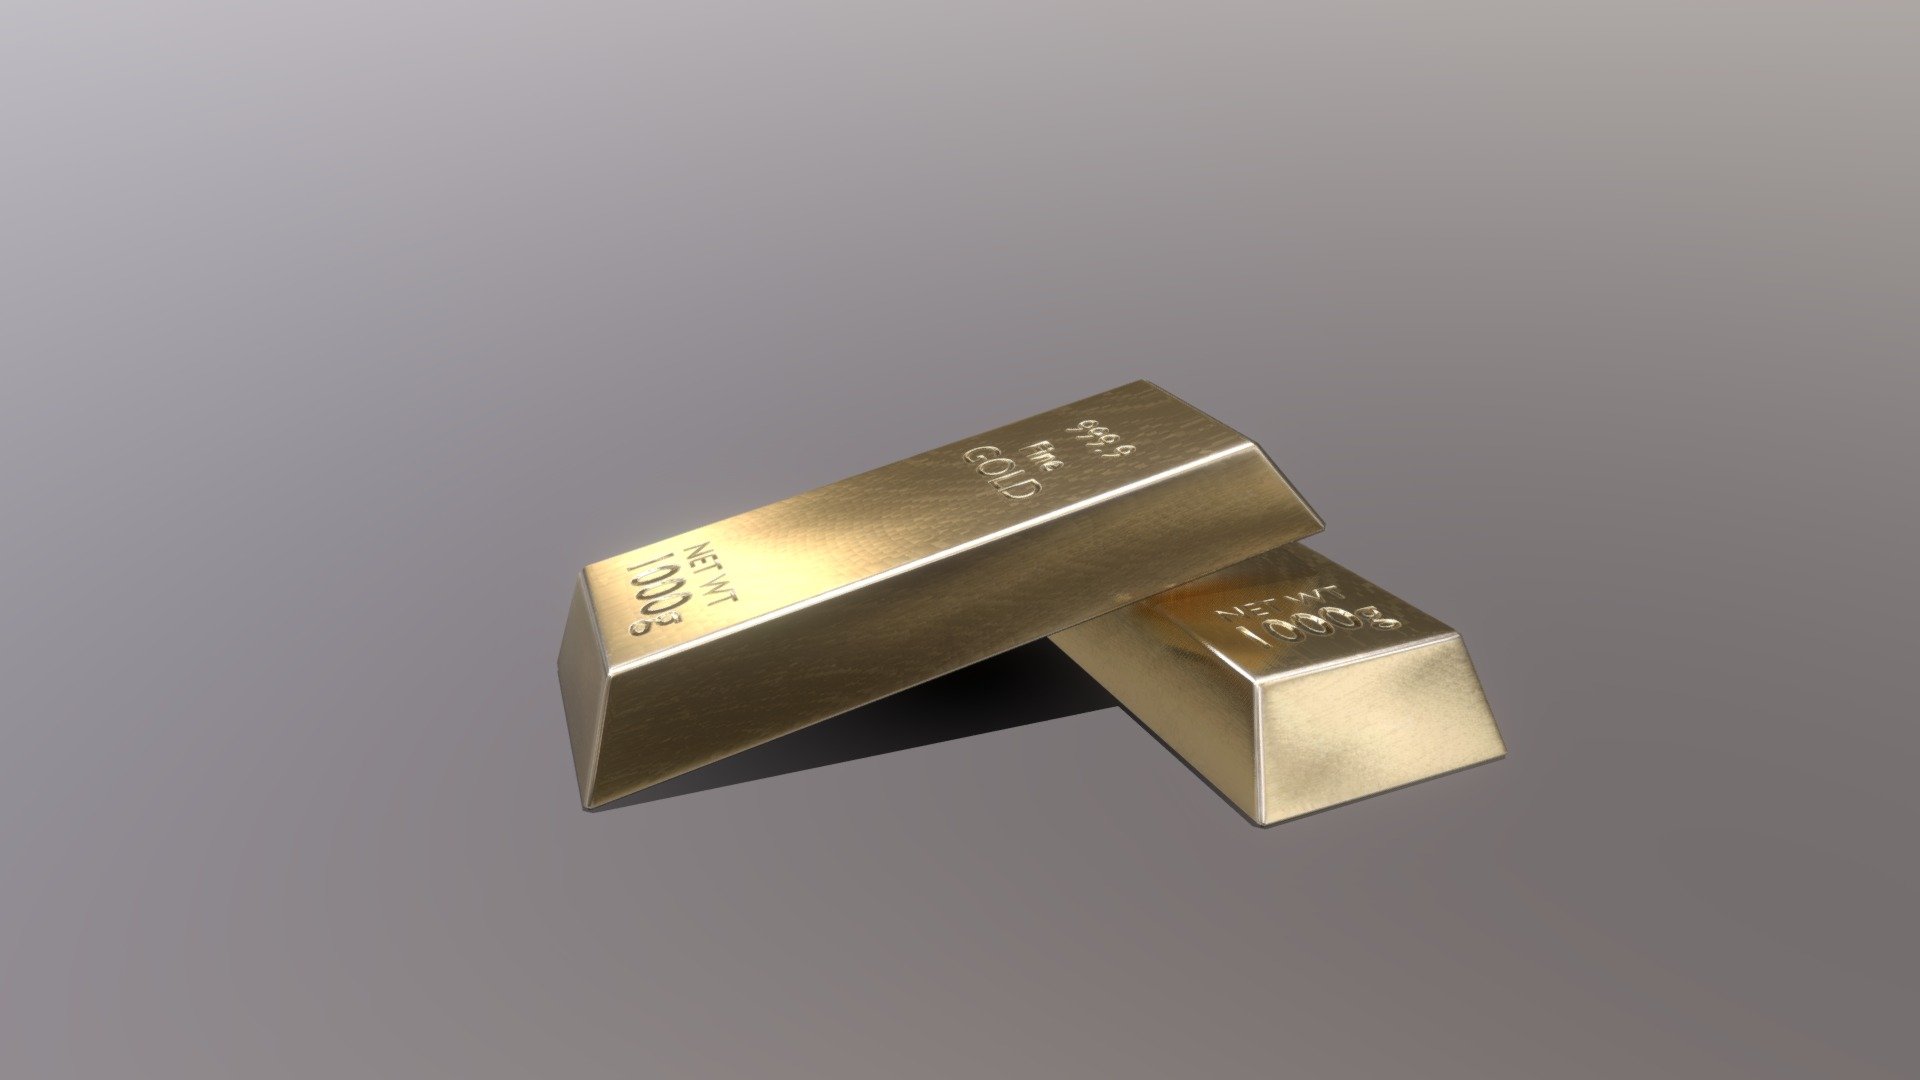 A realistic Gold bar, modeled in Blender and texturized in Substance Painter 3d model